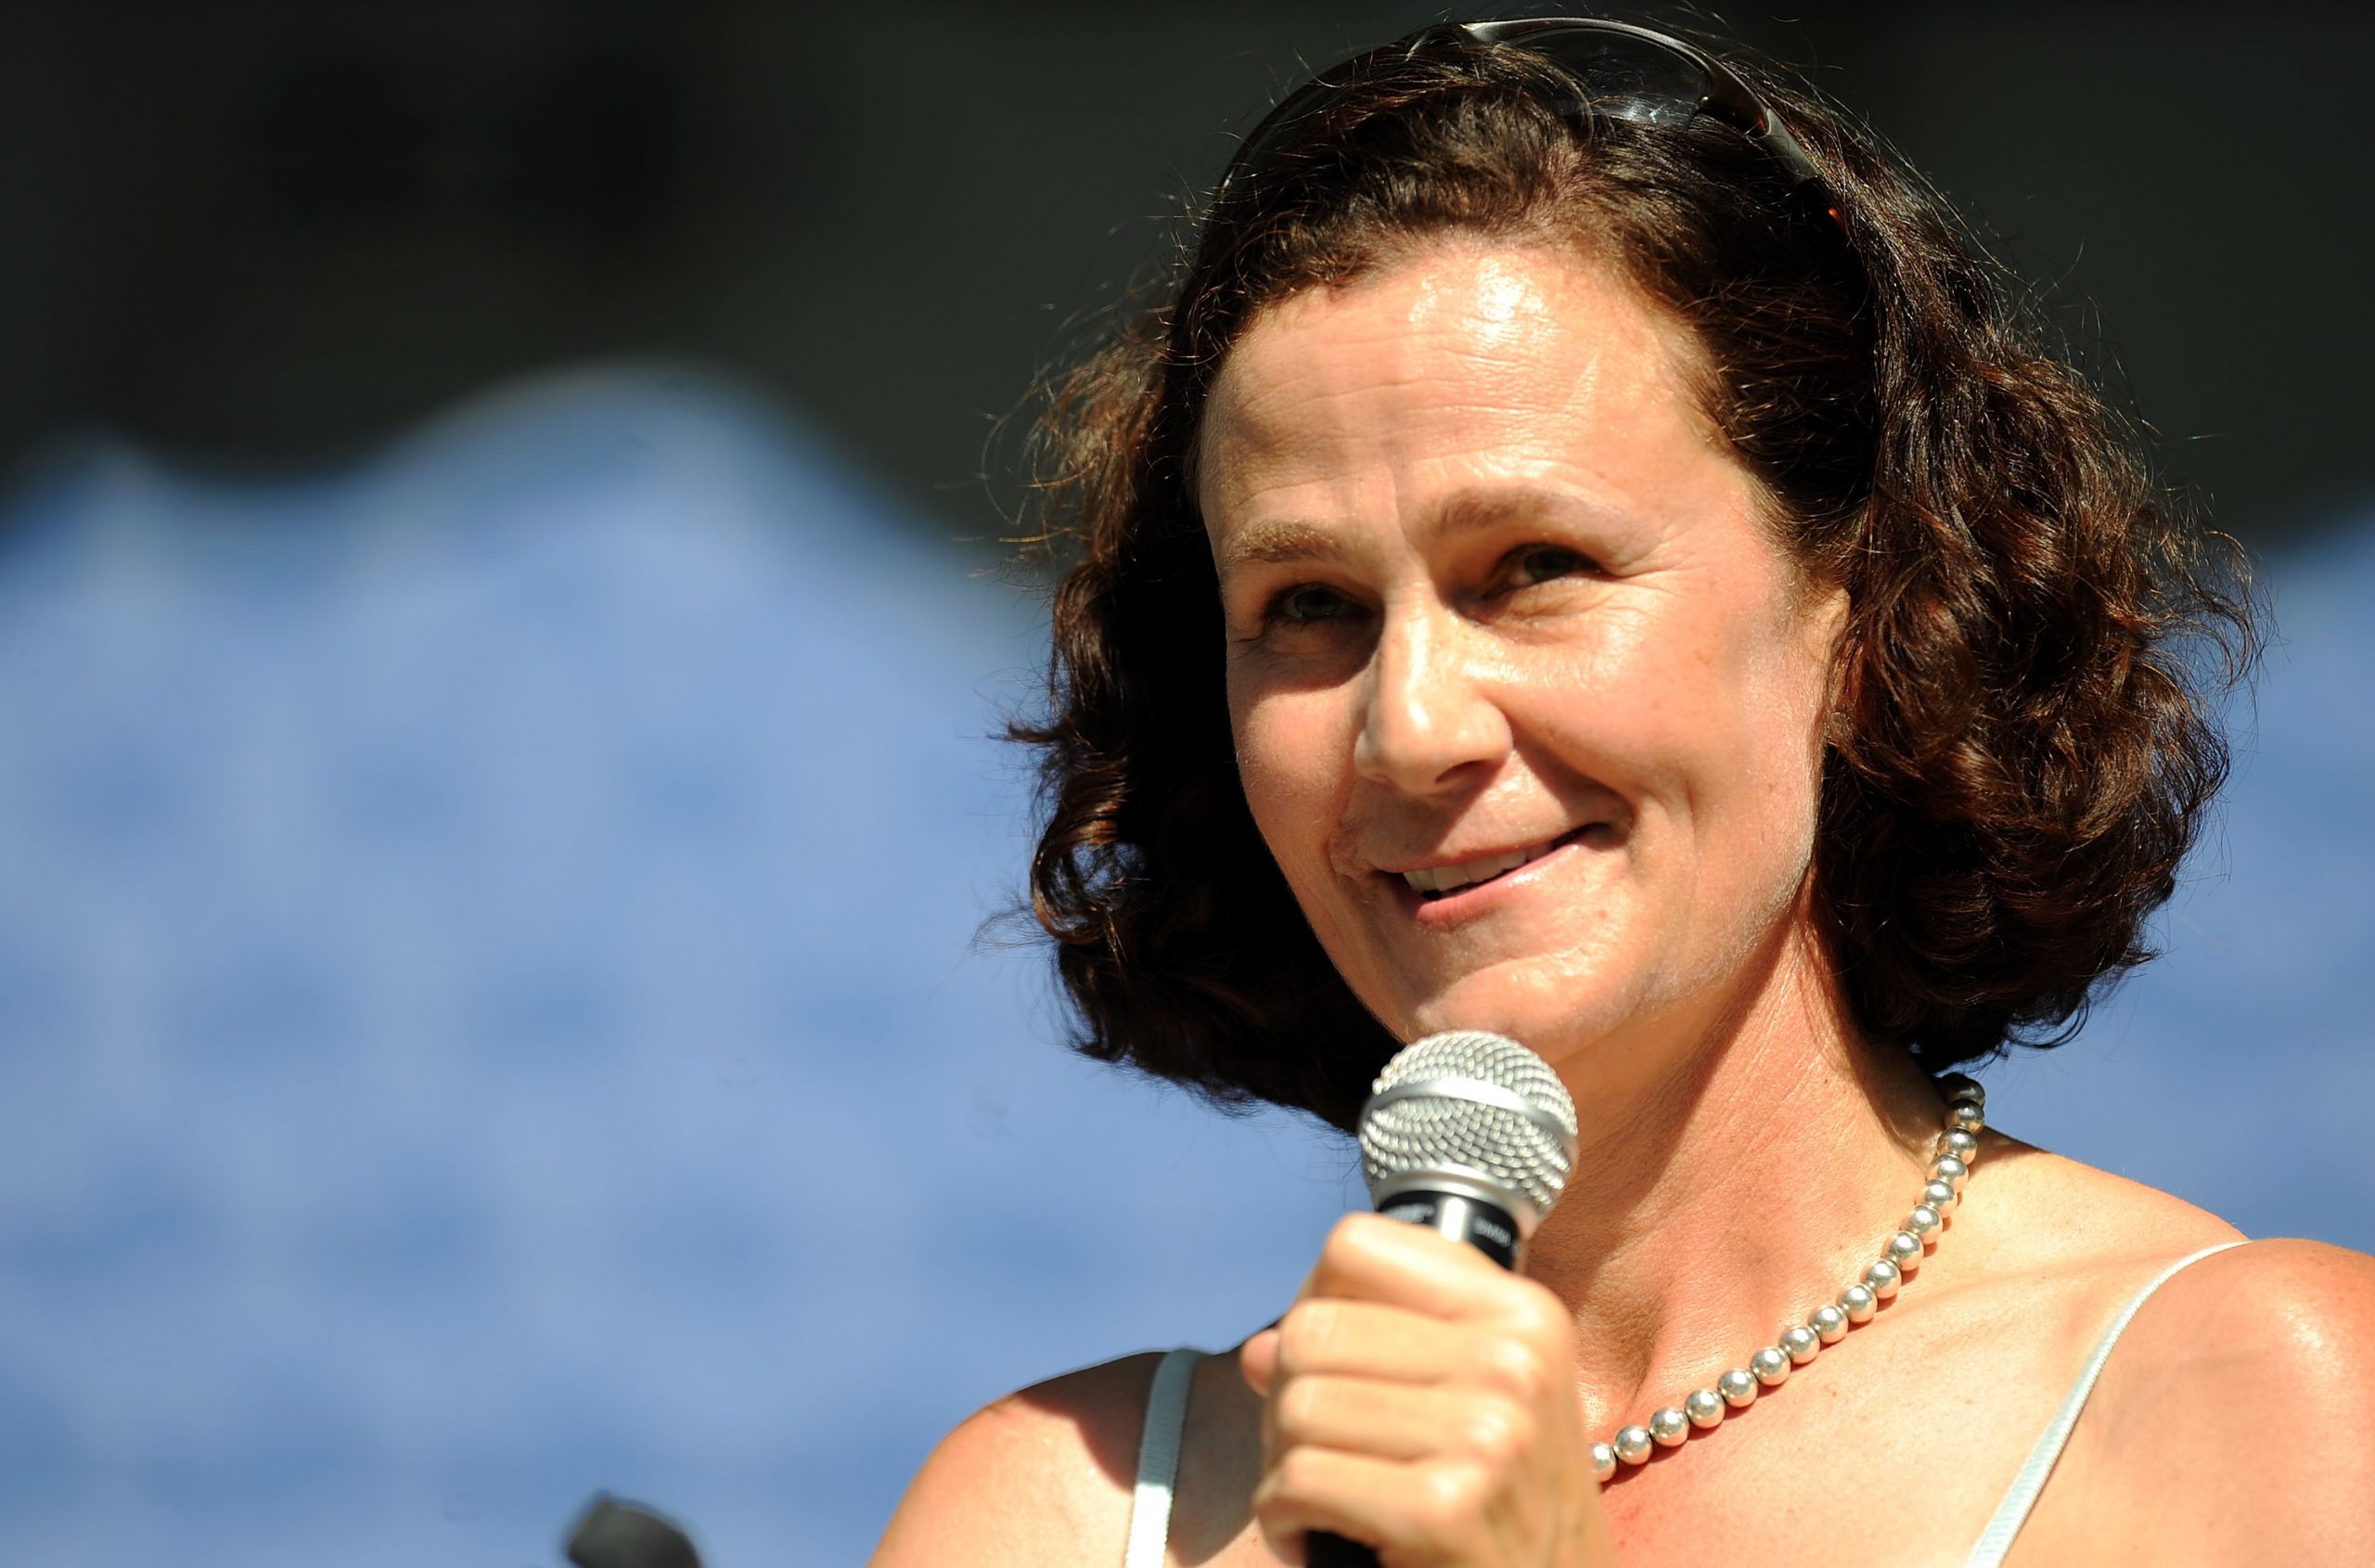 Former US tennis star and doubles player Pam Shriver was the first recipient of the Career Golden Slam feat. 